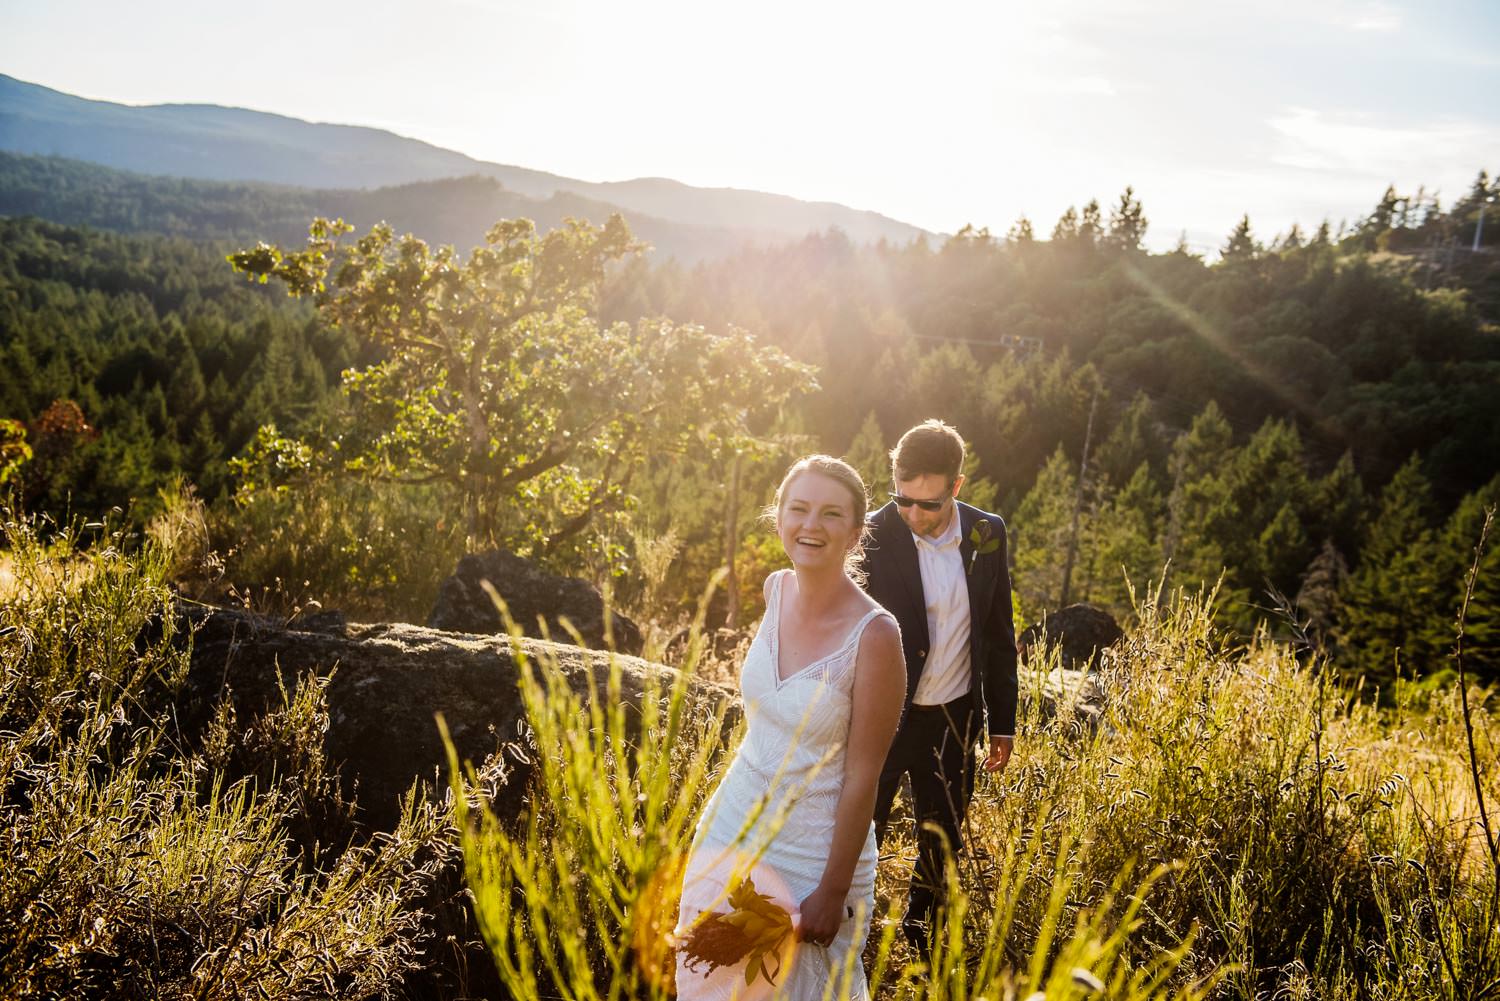 A sunset wedding in Victoria BC at Thetis Lake Regional Park